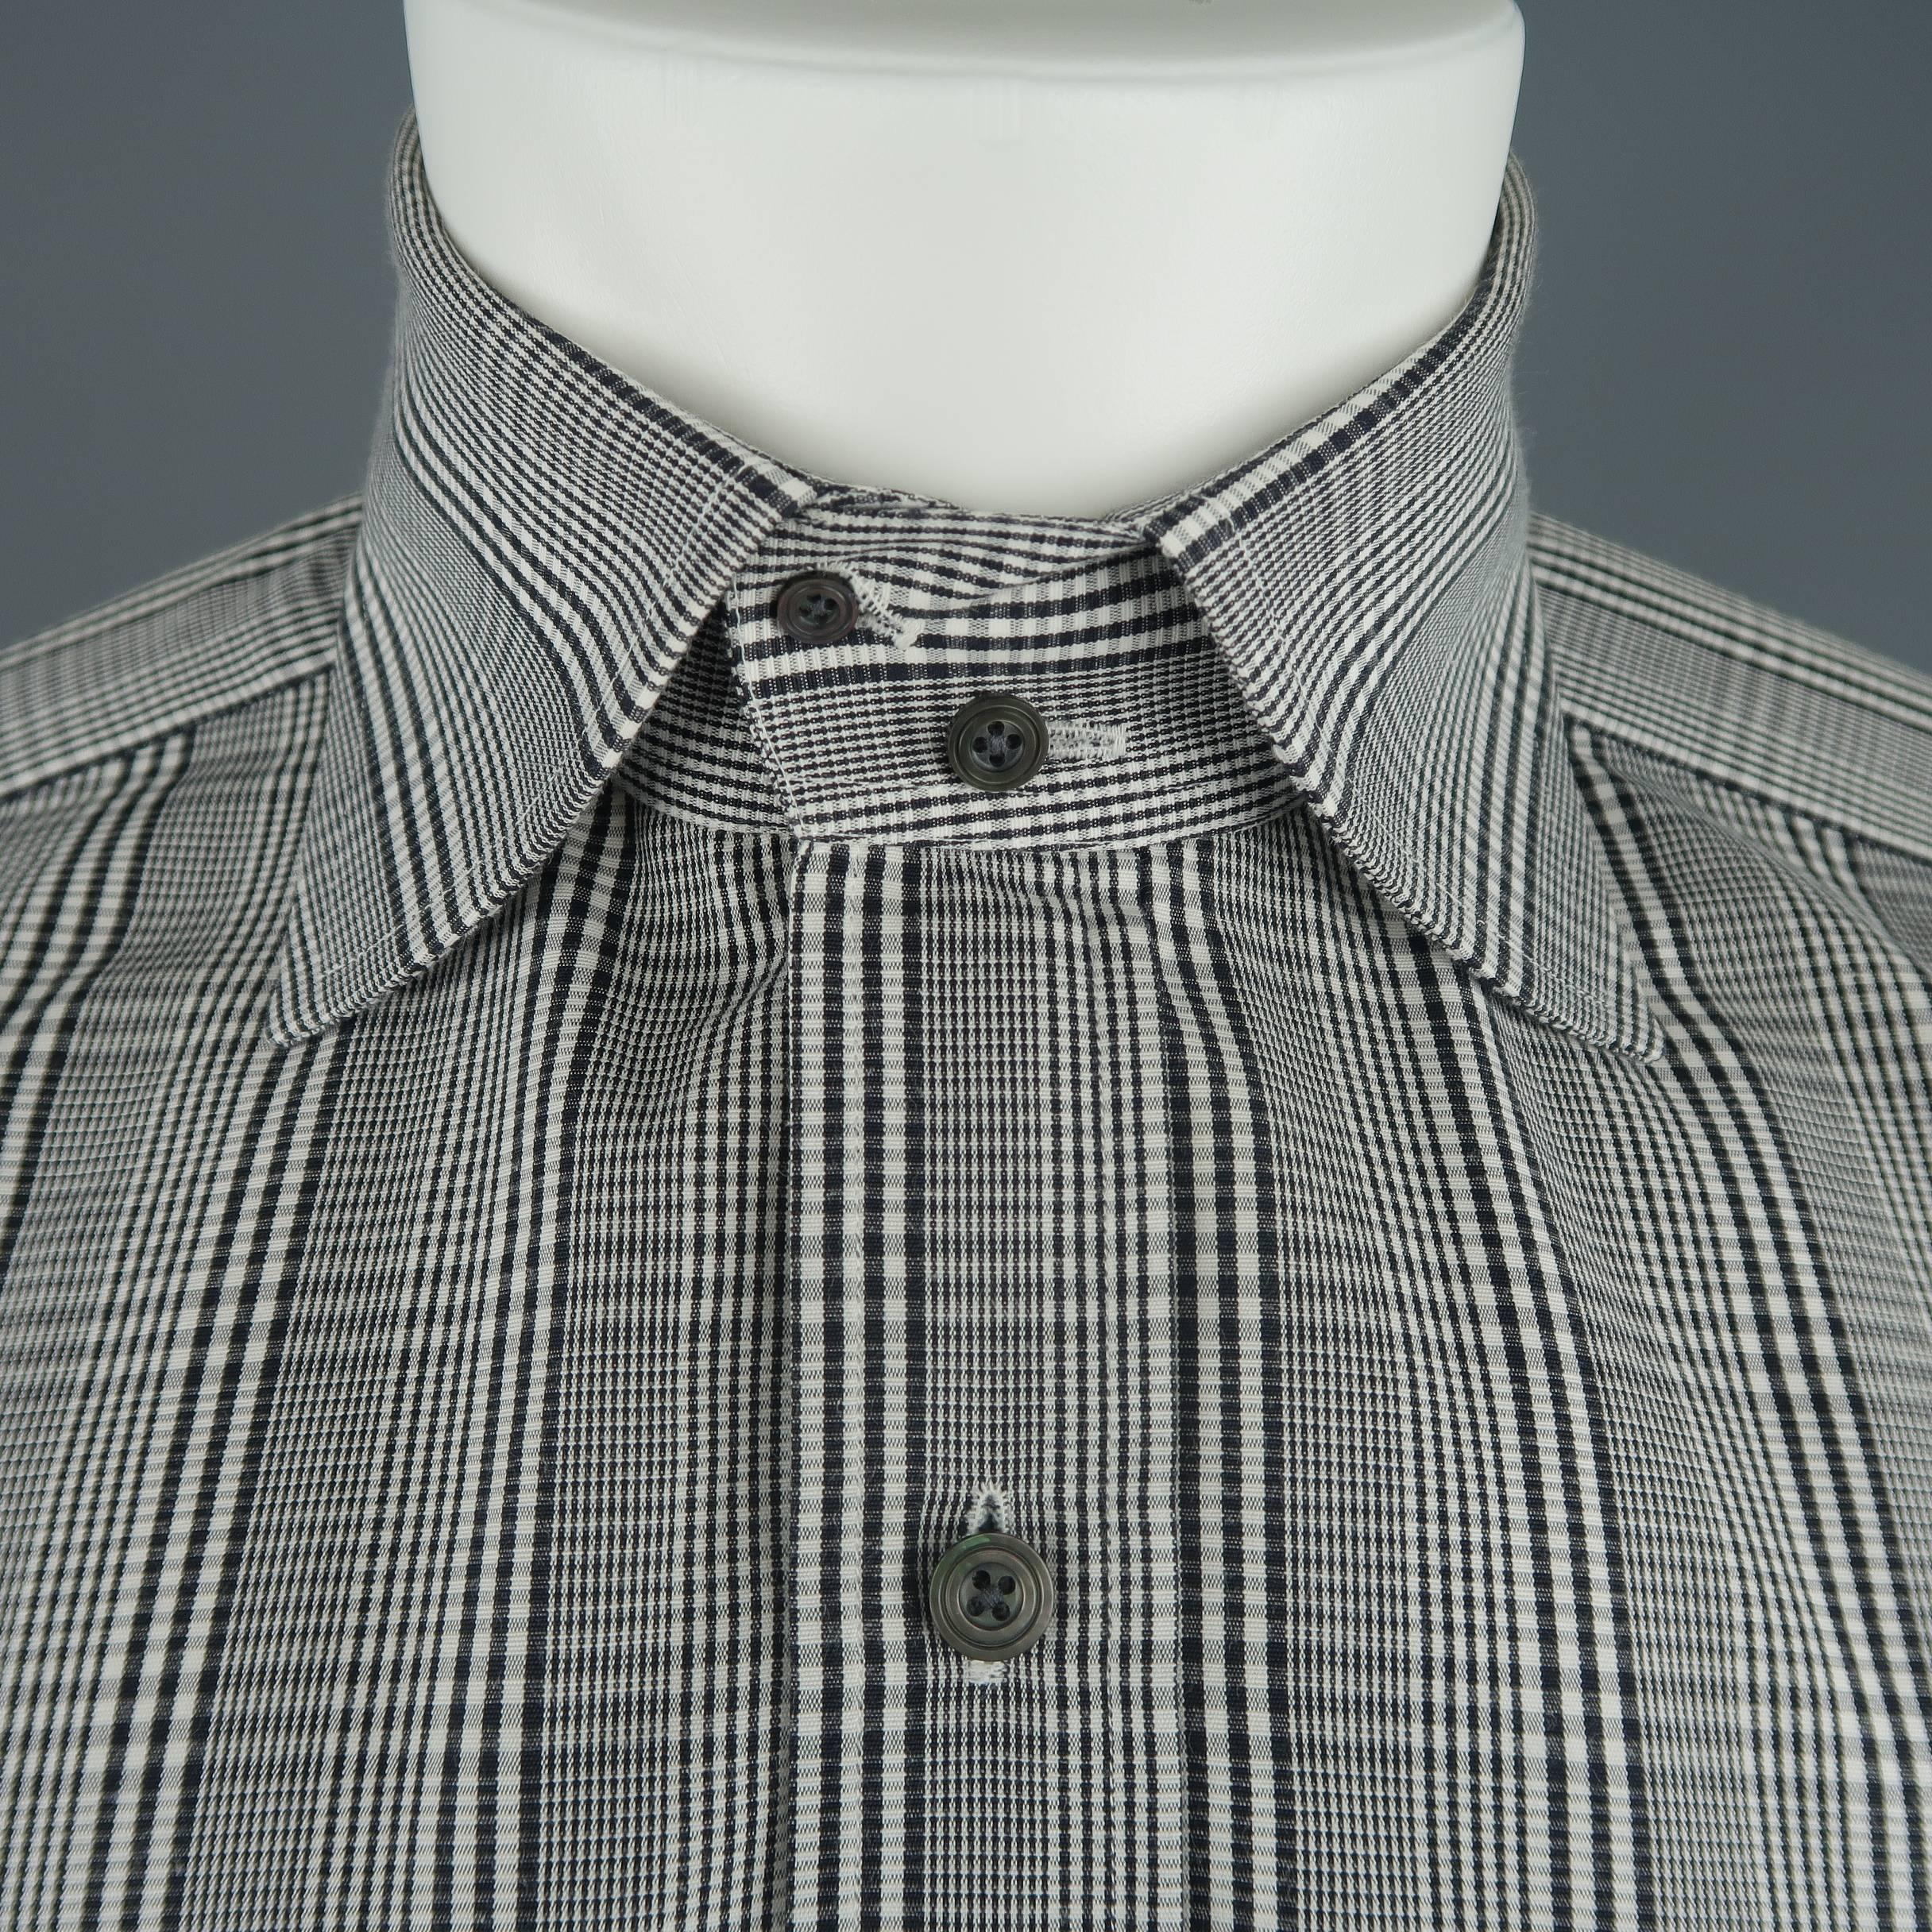 TOM FORD dress shirt comes in black and white plaid cotton with a two button spread collar and two button cuffs. Made in Italy.
 
Excellent Pre-Owned Condition.
Marked: 40  15 3/4
 
Measurements:
 
Shoulder: 17 in.
Chest: 42 in.
Sleeve: 27